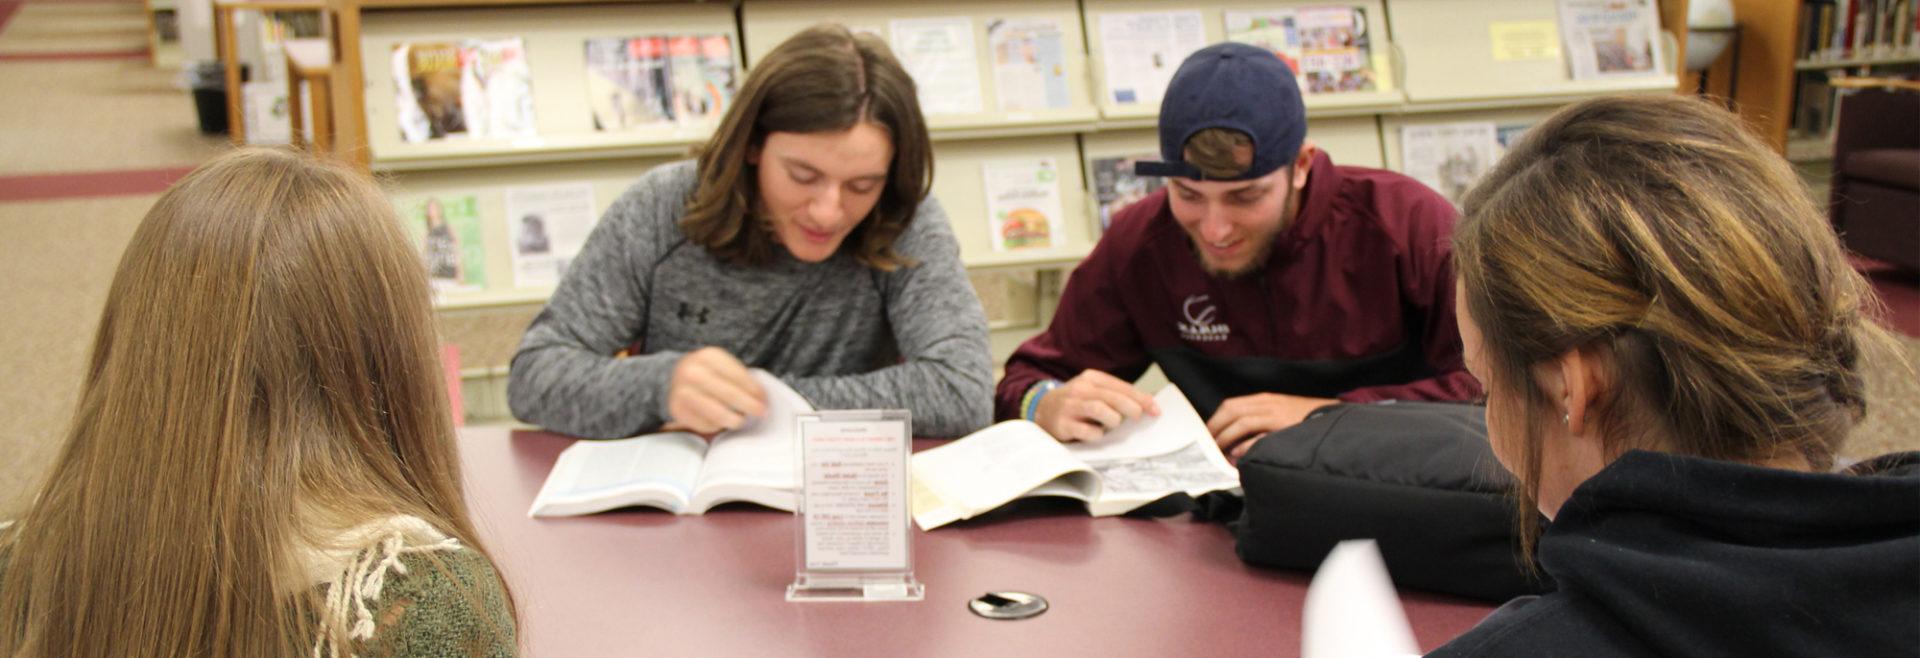 four students at a table in the library